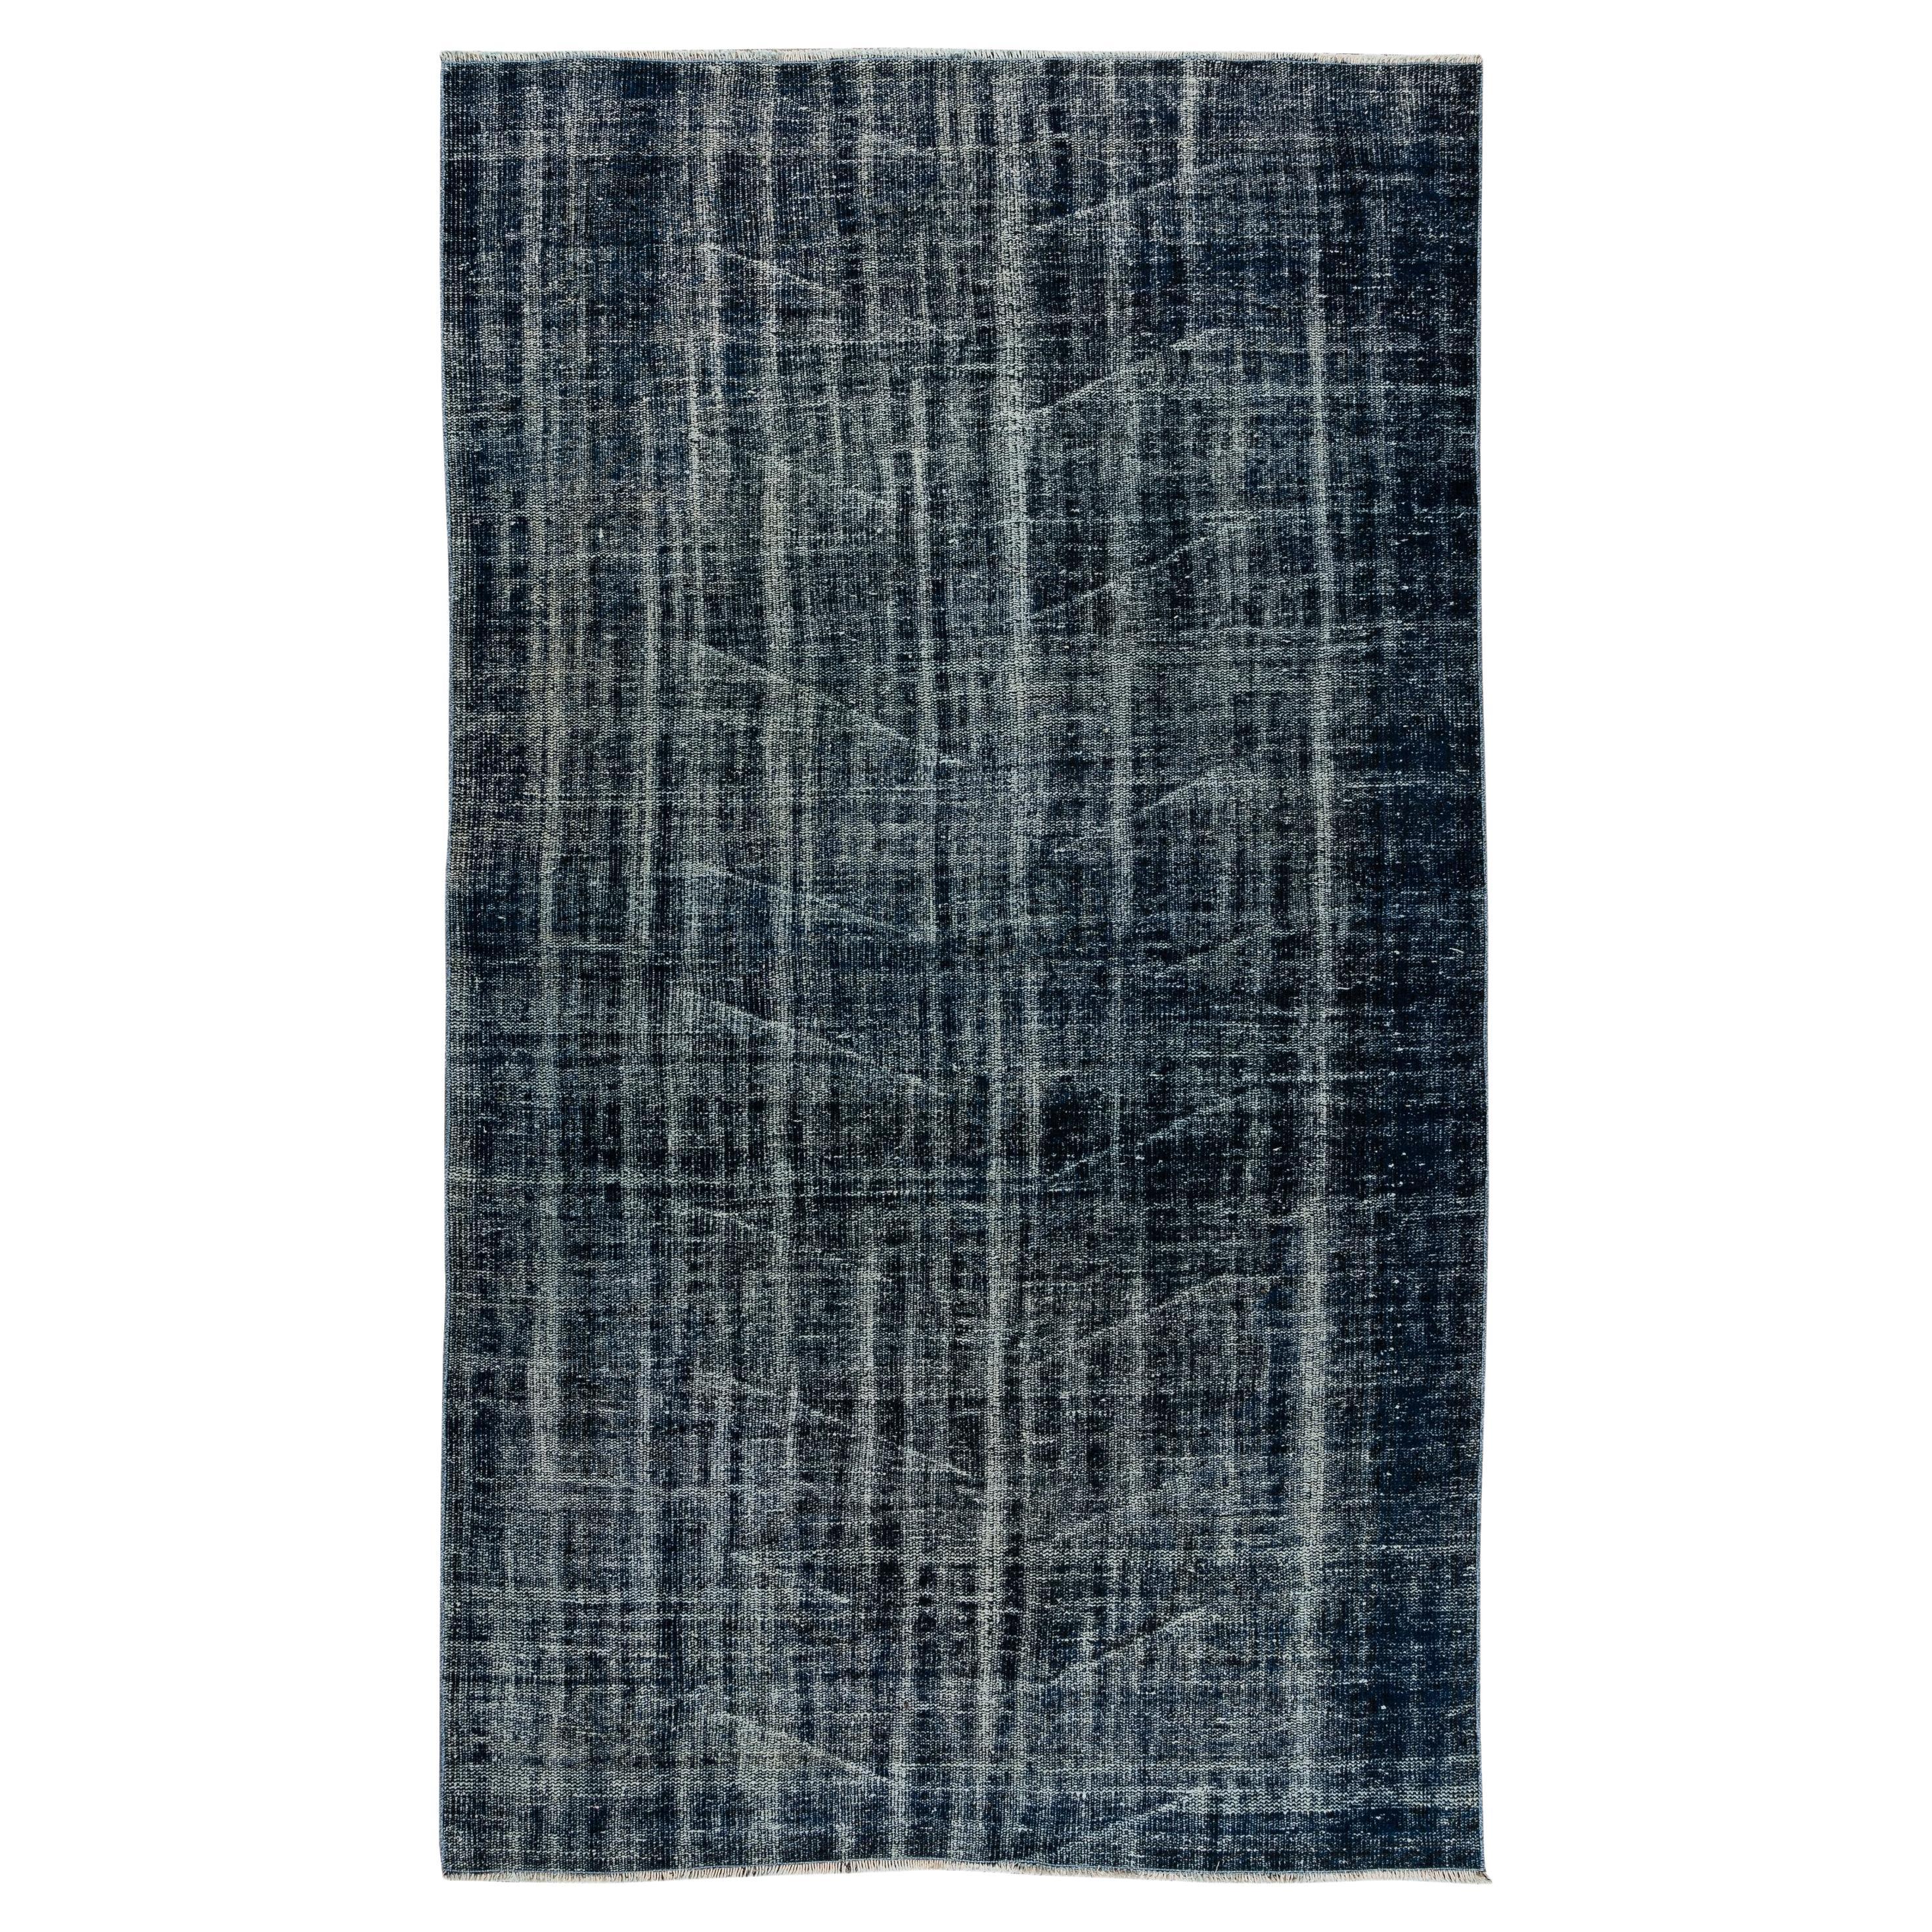 Turkish Vintage Wool Carpet in Navy Blue, Modern Hand Knotted Area Rug For Sale